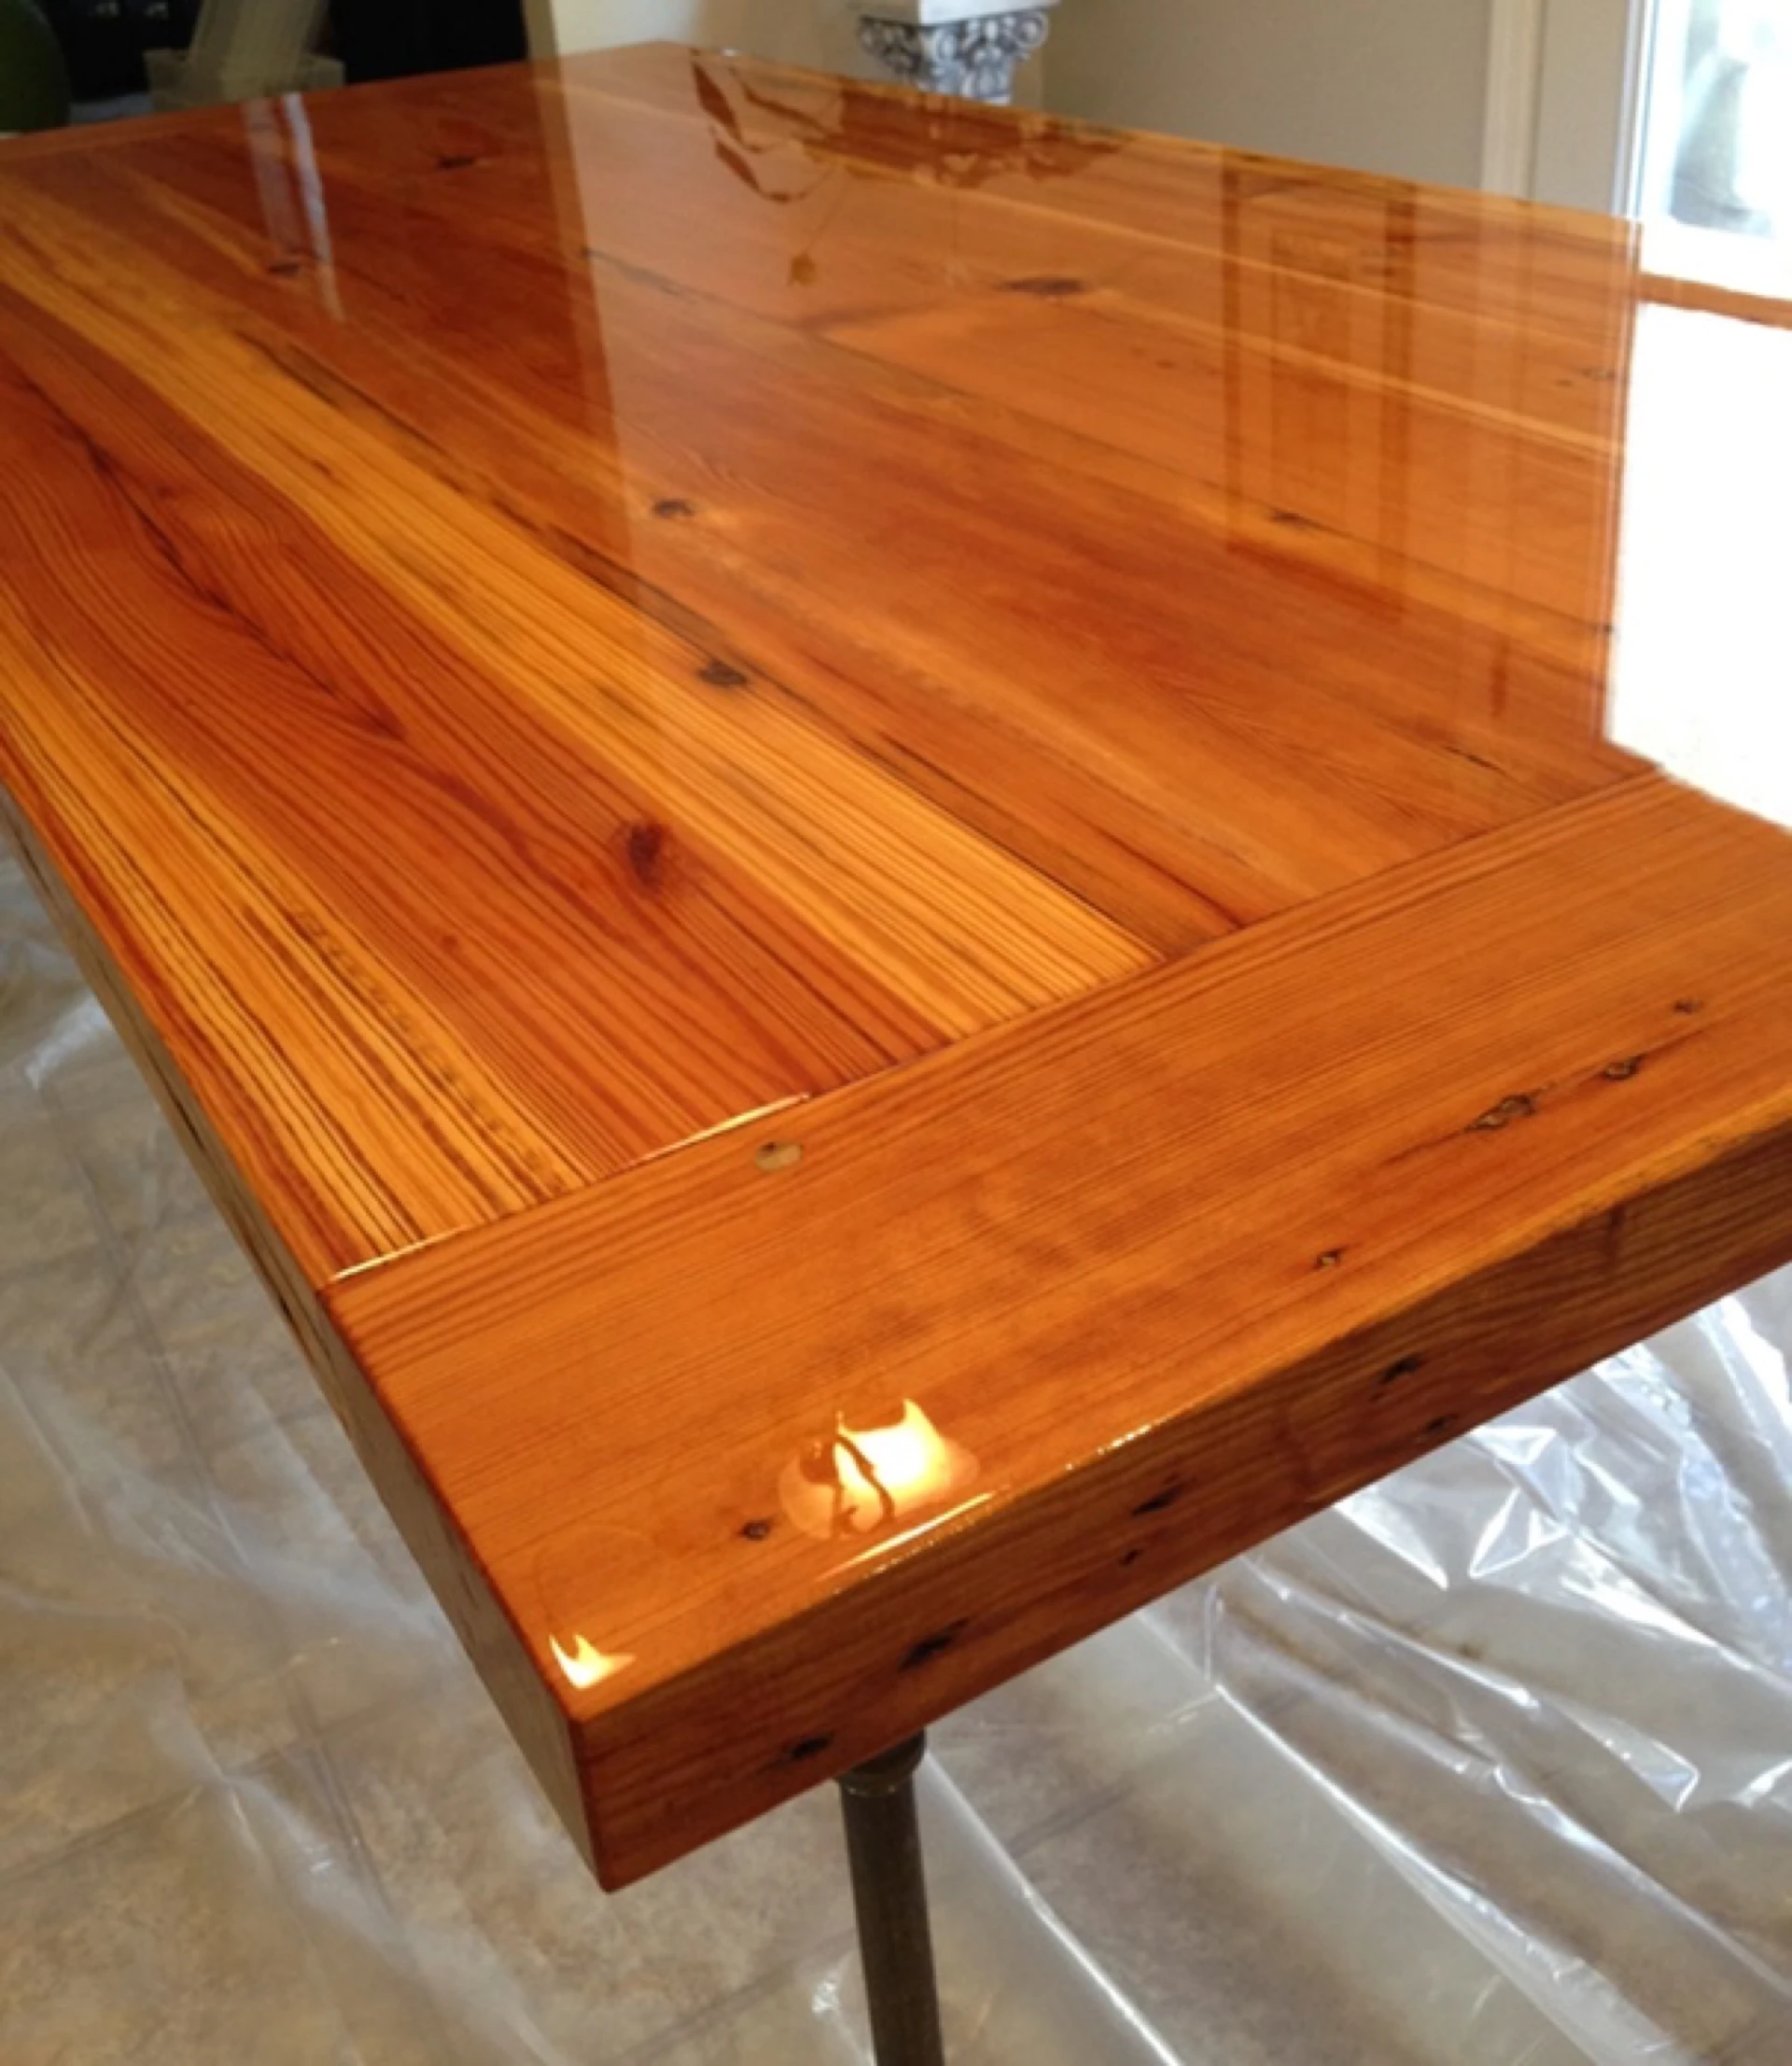 Pine table with epoxy finish